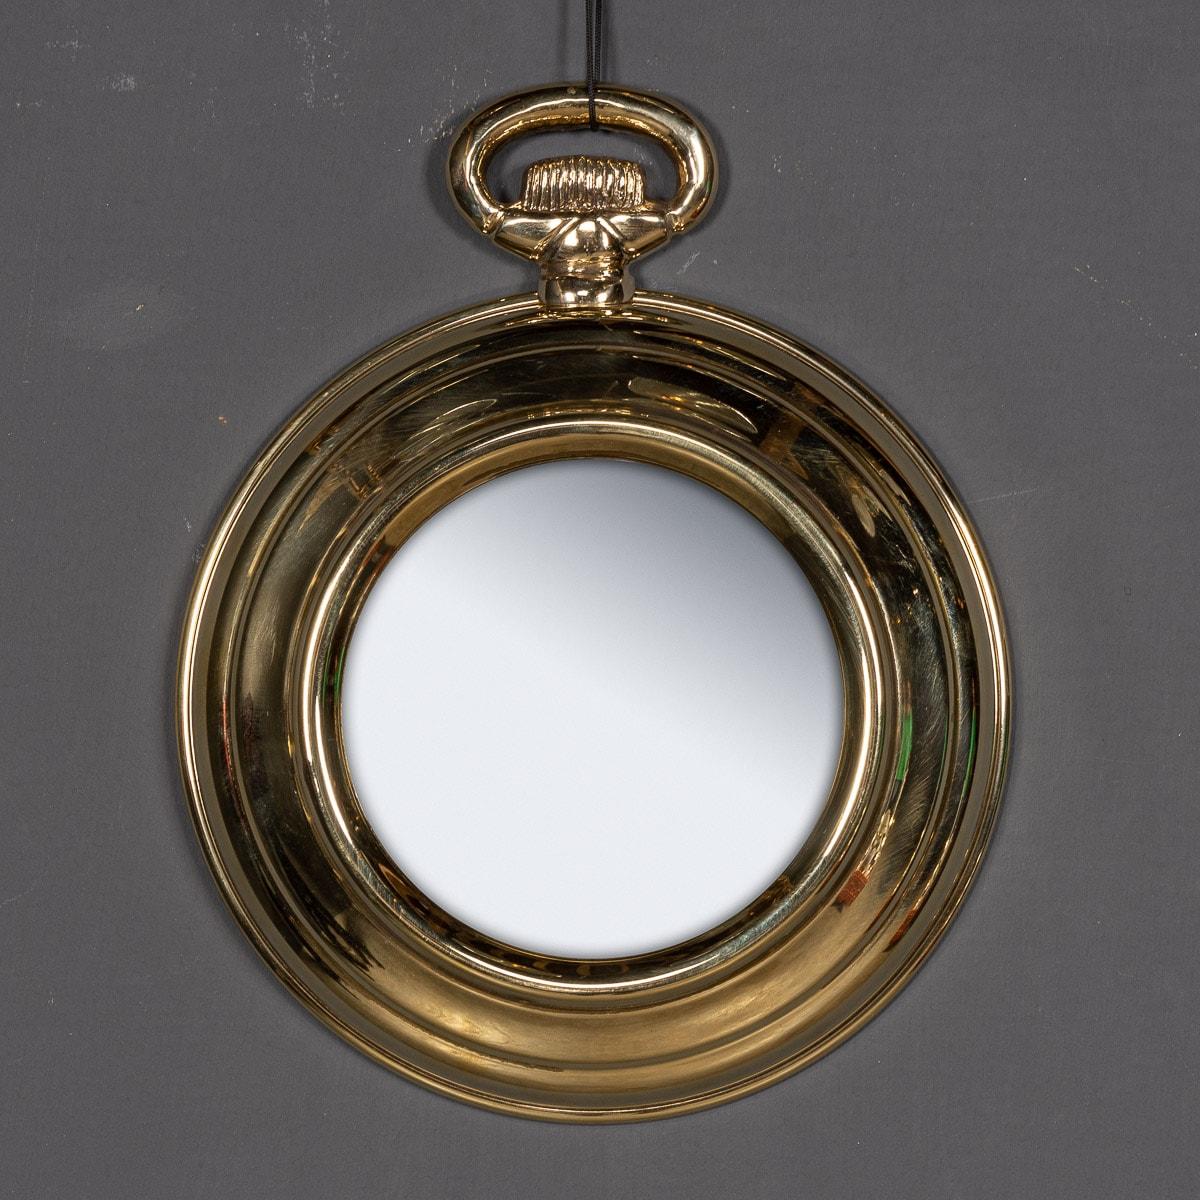 20th Century Striking Collection Of Pocket Watch Shaped Mirrors, c.1950-1970 15